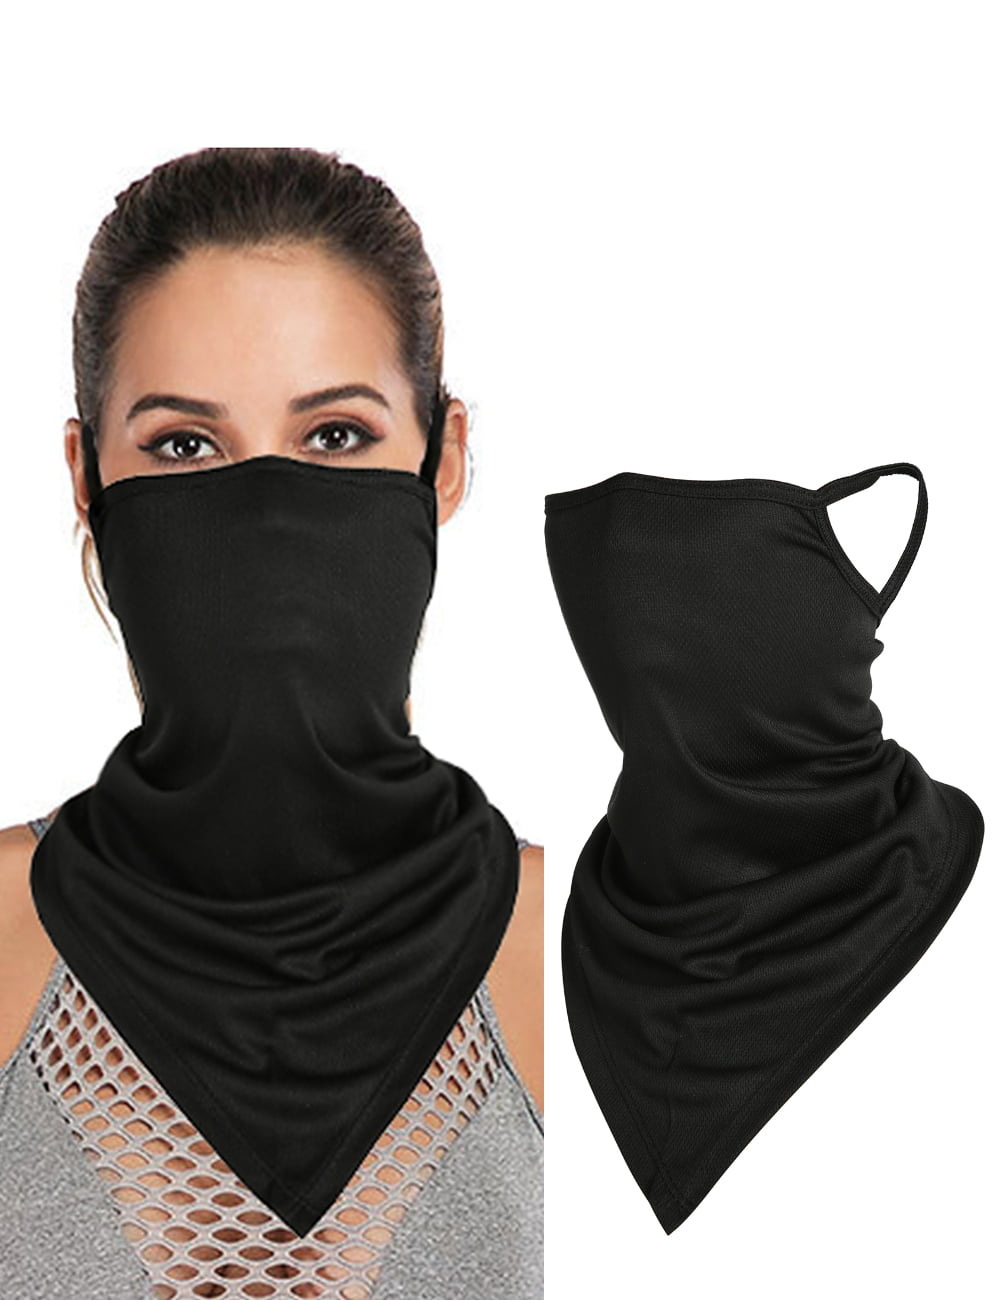 Face Scarf,Warmer Face Mask,Super Soft and Stretchy Neck Gaiter.Windproof Sports Mask，Scarf face mask,Cooling Neck Wraps for Summer Heat Trump-2020-USA